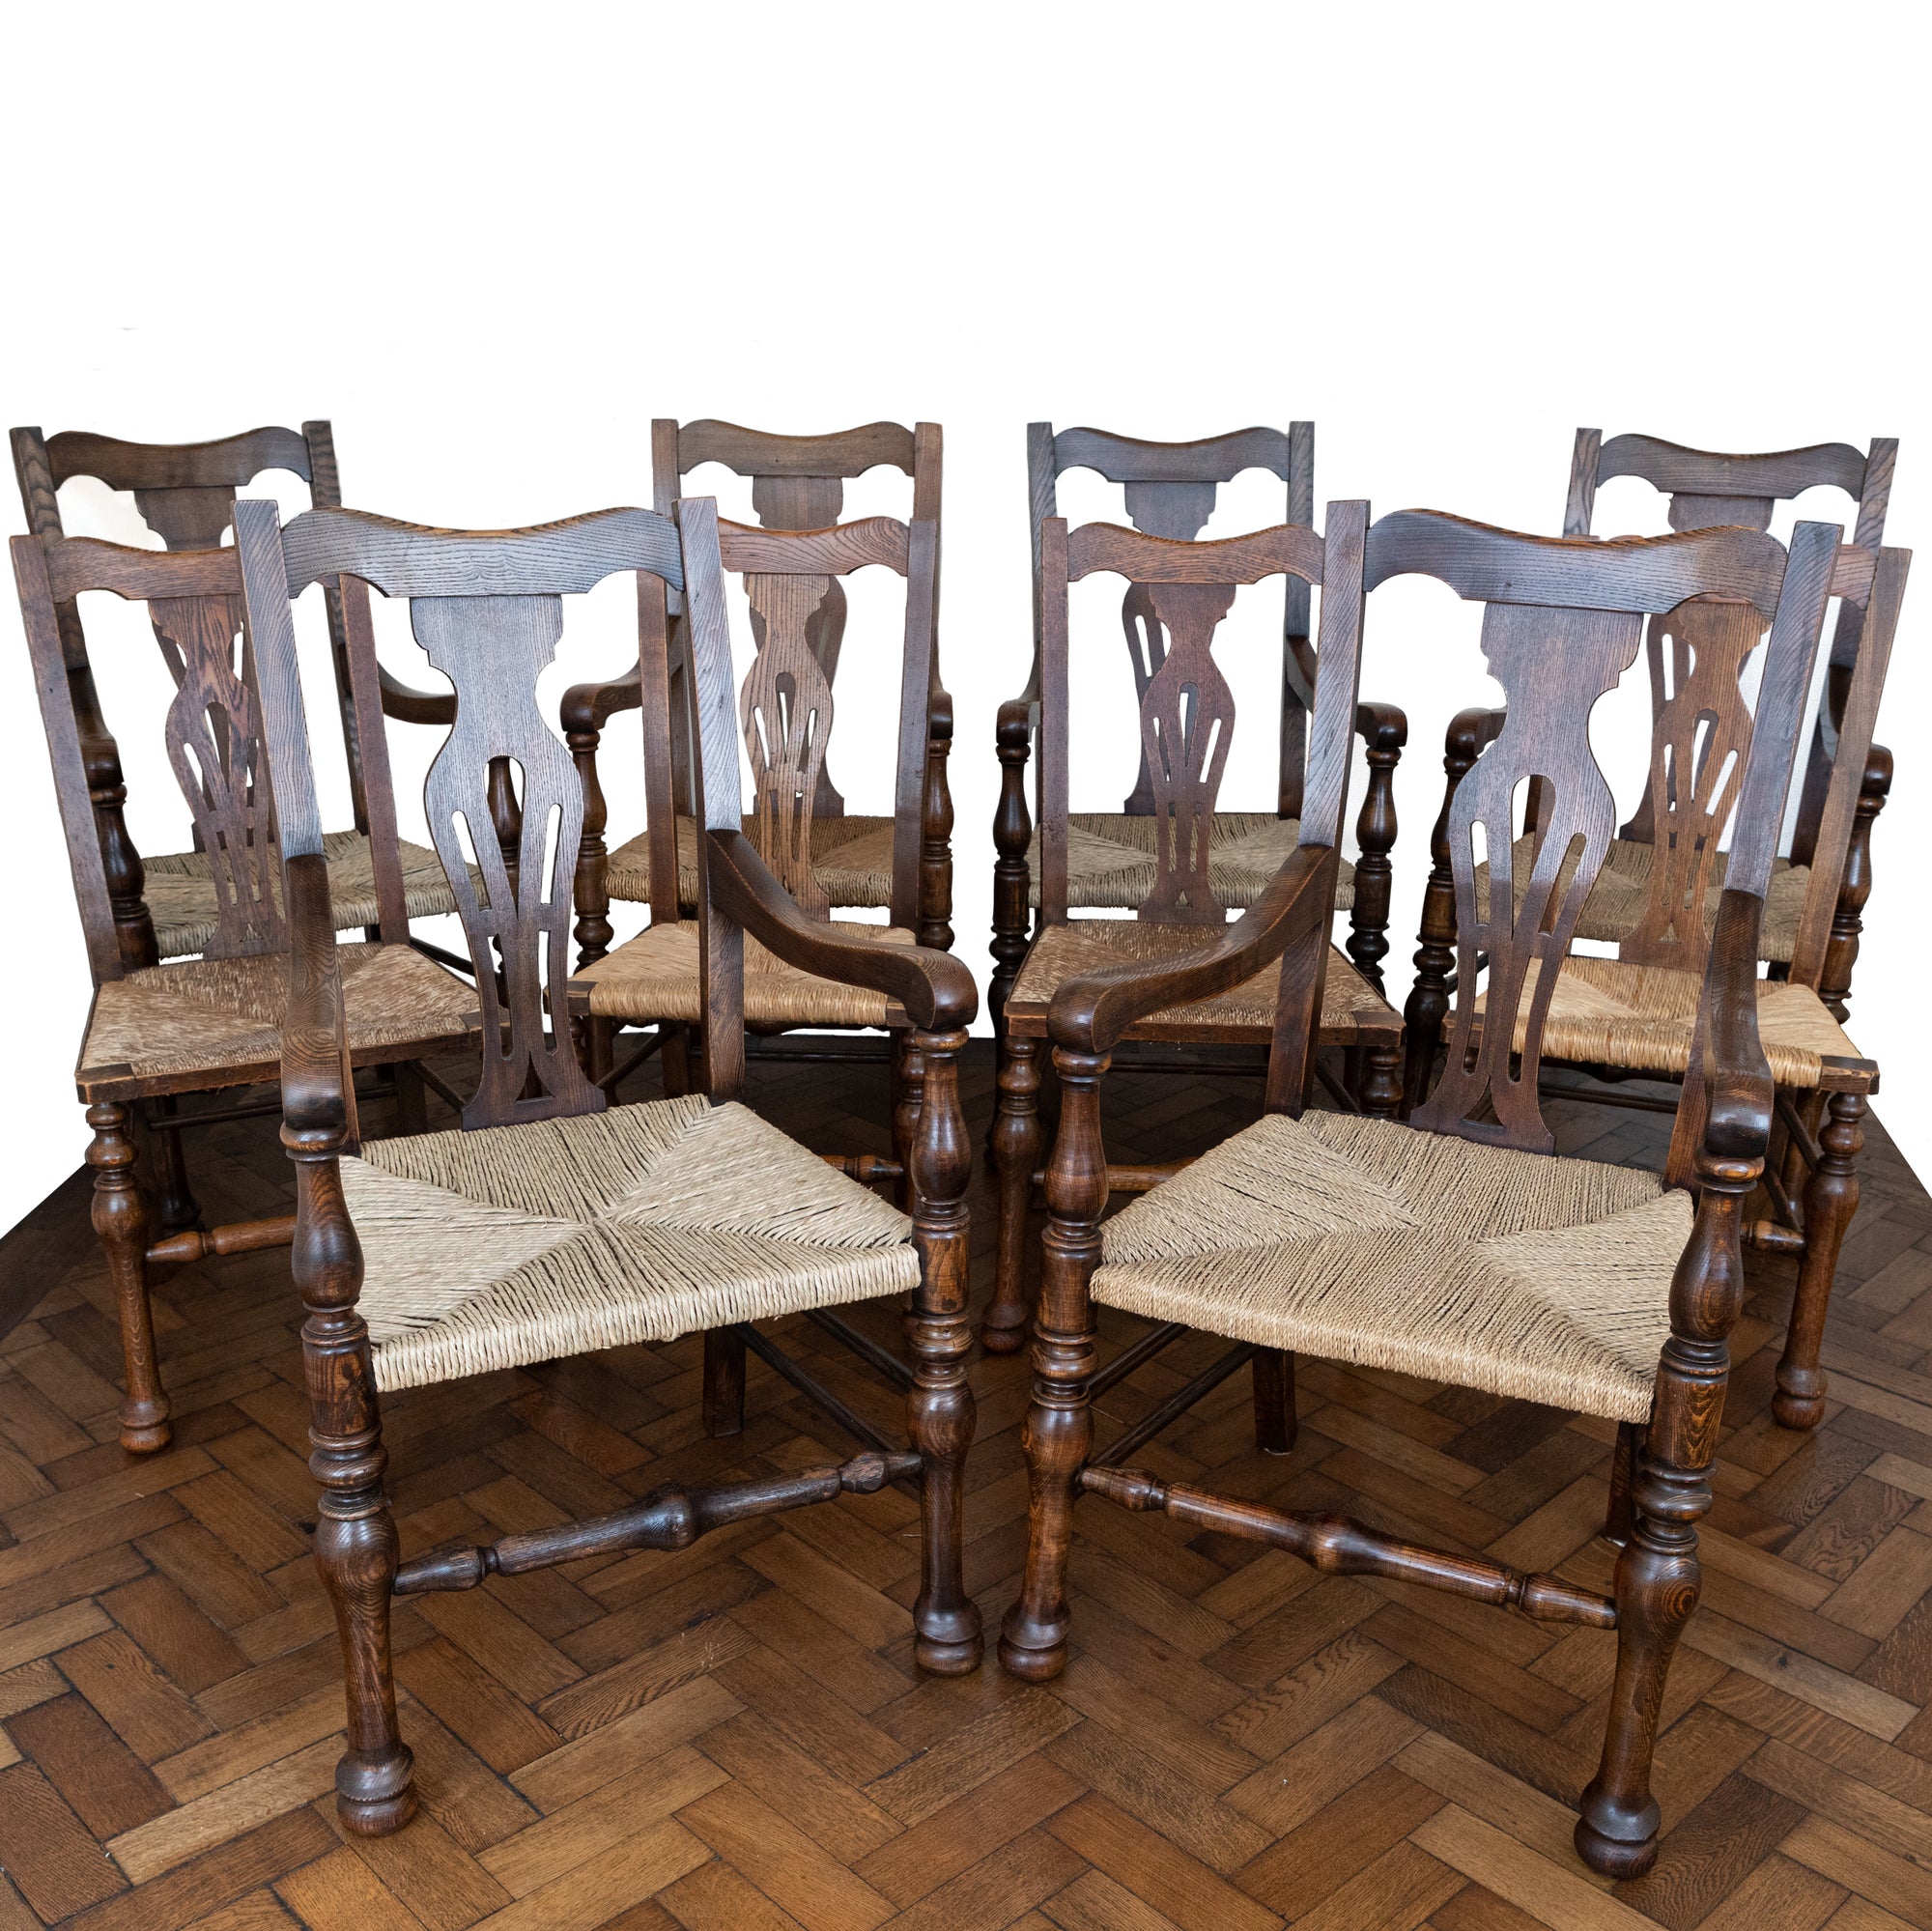 Set of 10 Antique Carver Arm Chairs with Rush Seats | The Architectural Forum